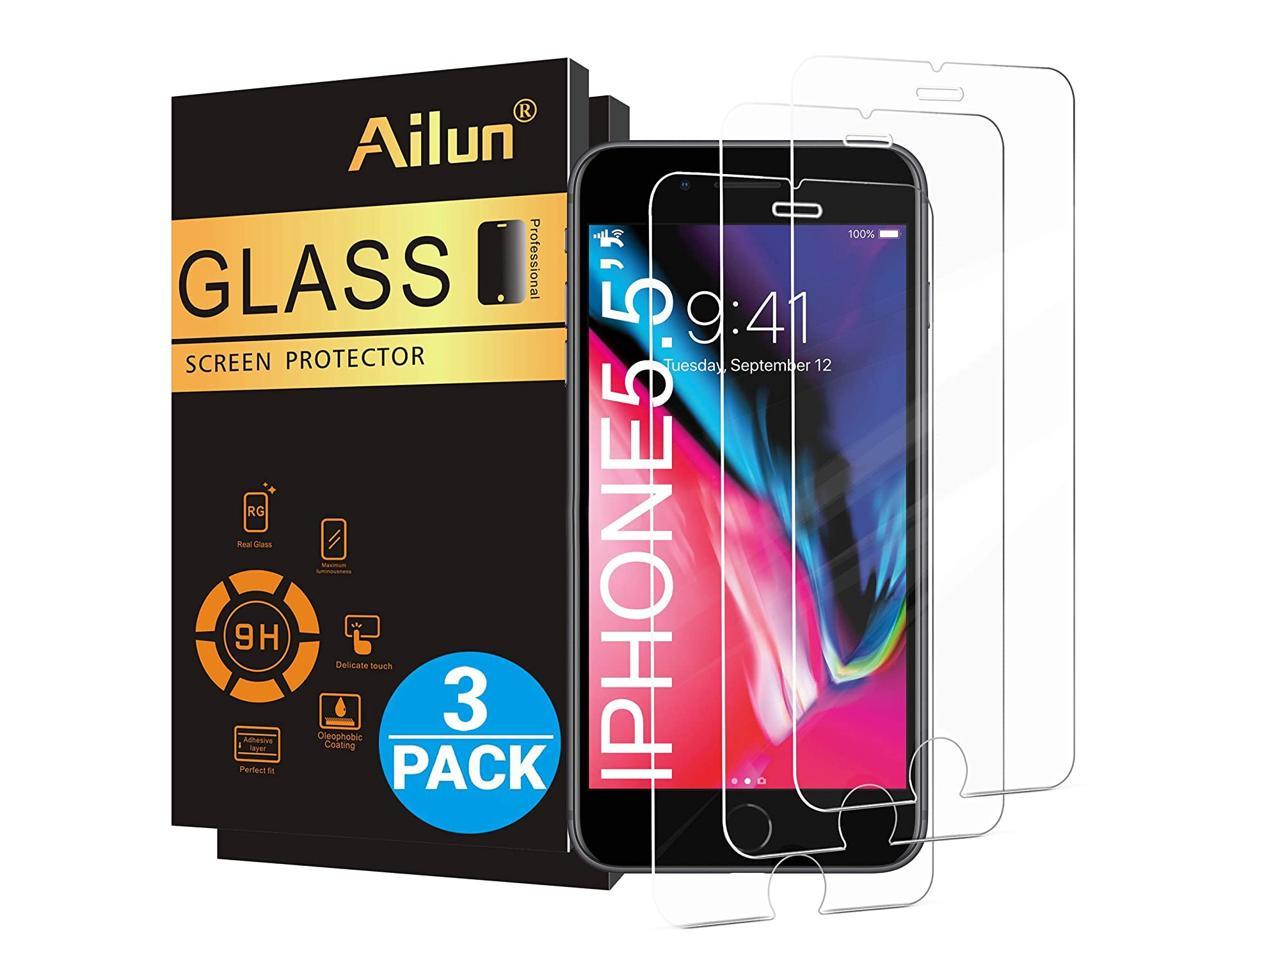 2017 2016 iPhone 8 4.7 inch Cellet Tempered Glass Screen Protector for Apple iPhone 8 2015 7 6 Screen Protector Glass iPhone 6S 7 2-Pack 6S iPhone 6